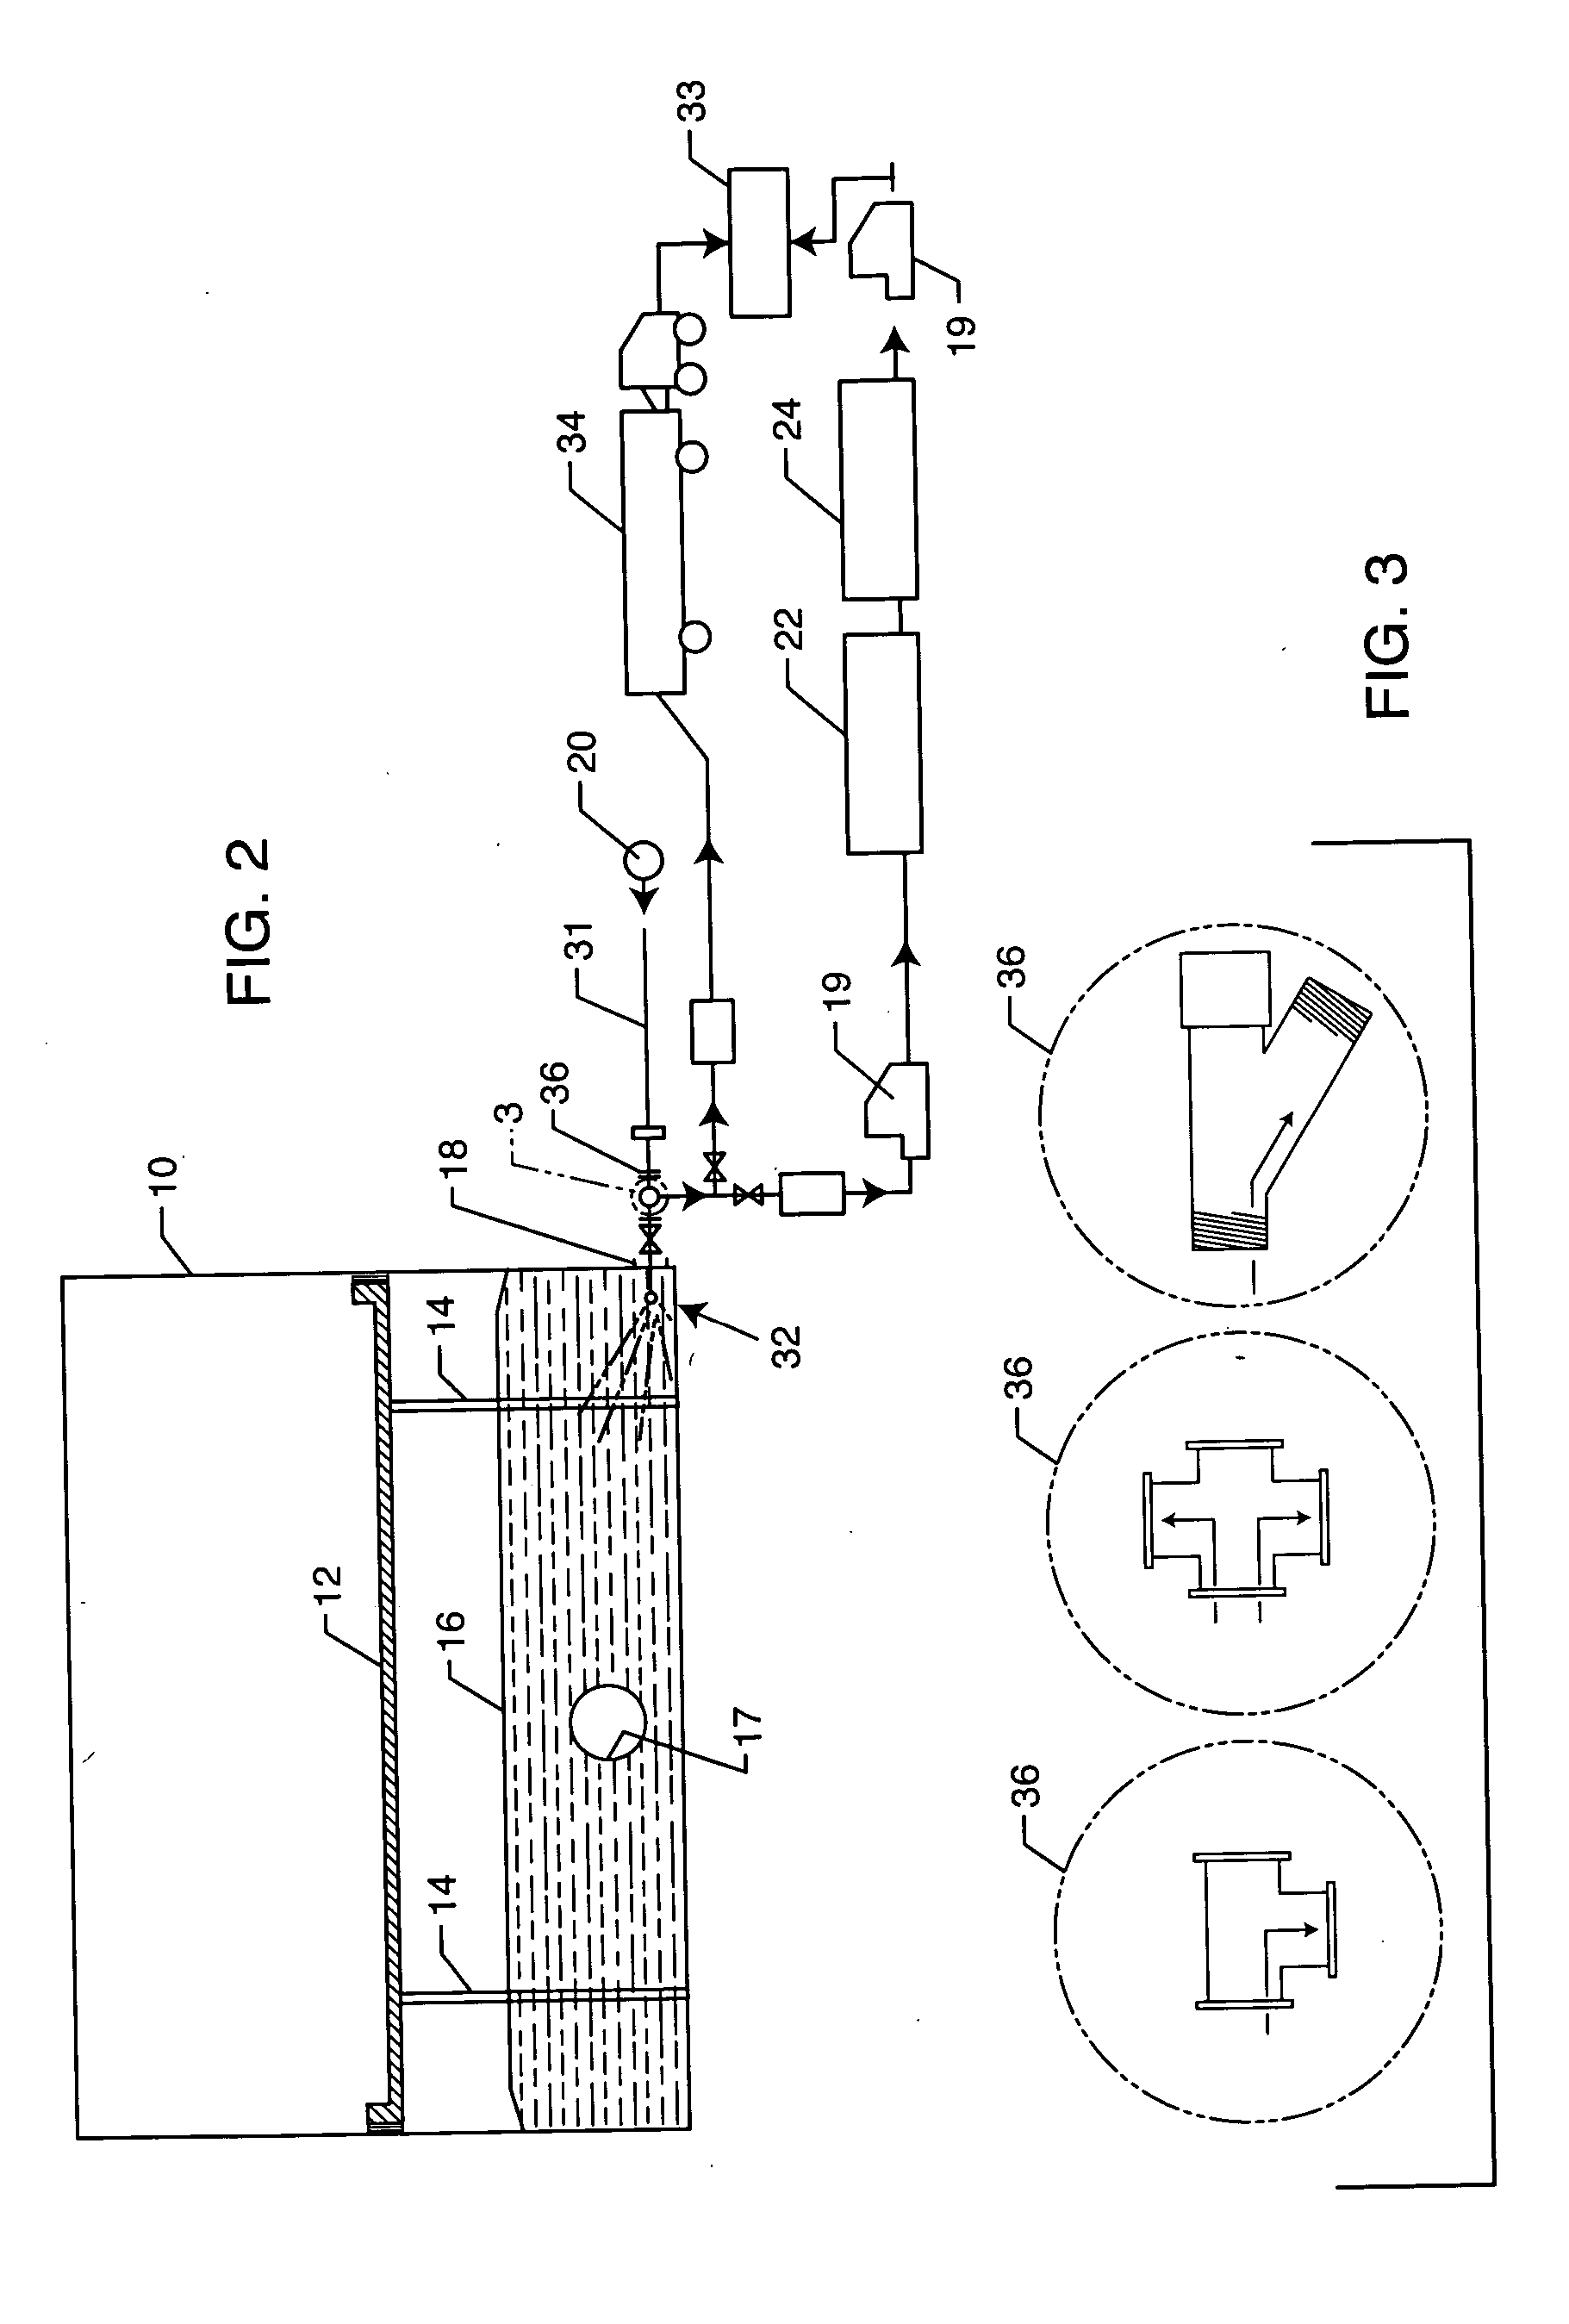 Petroleum recovery and cleaning system and process